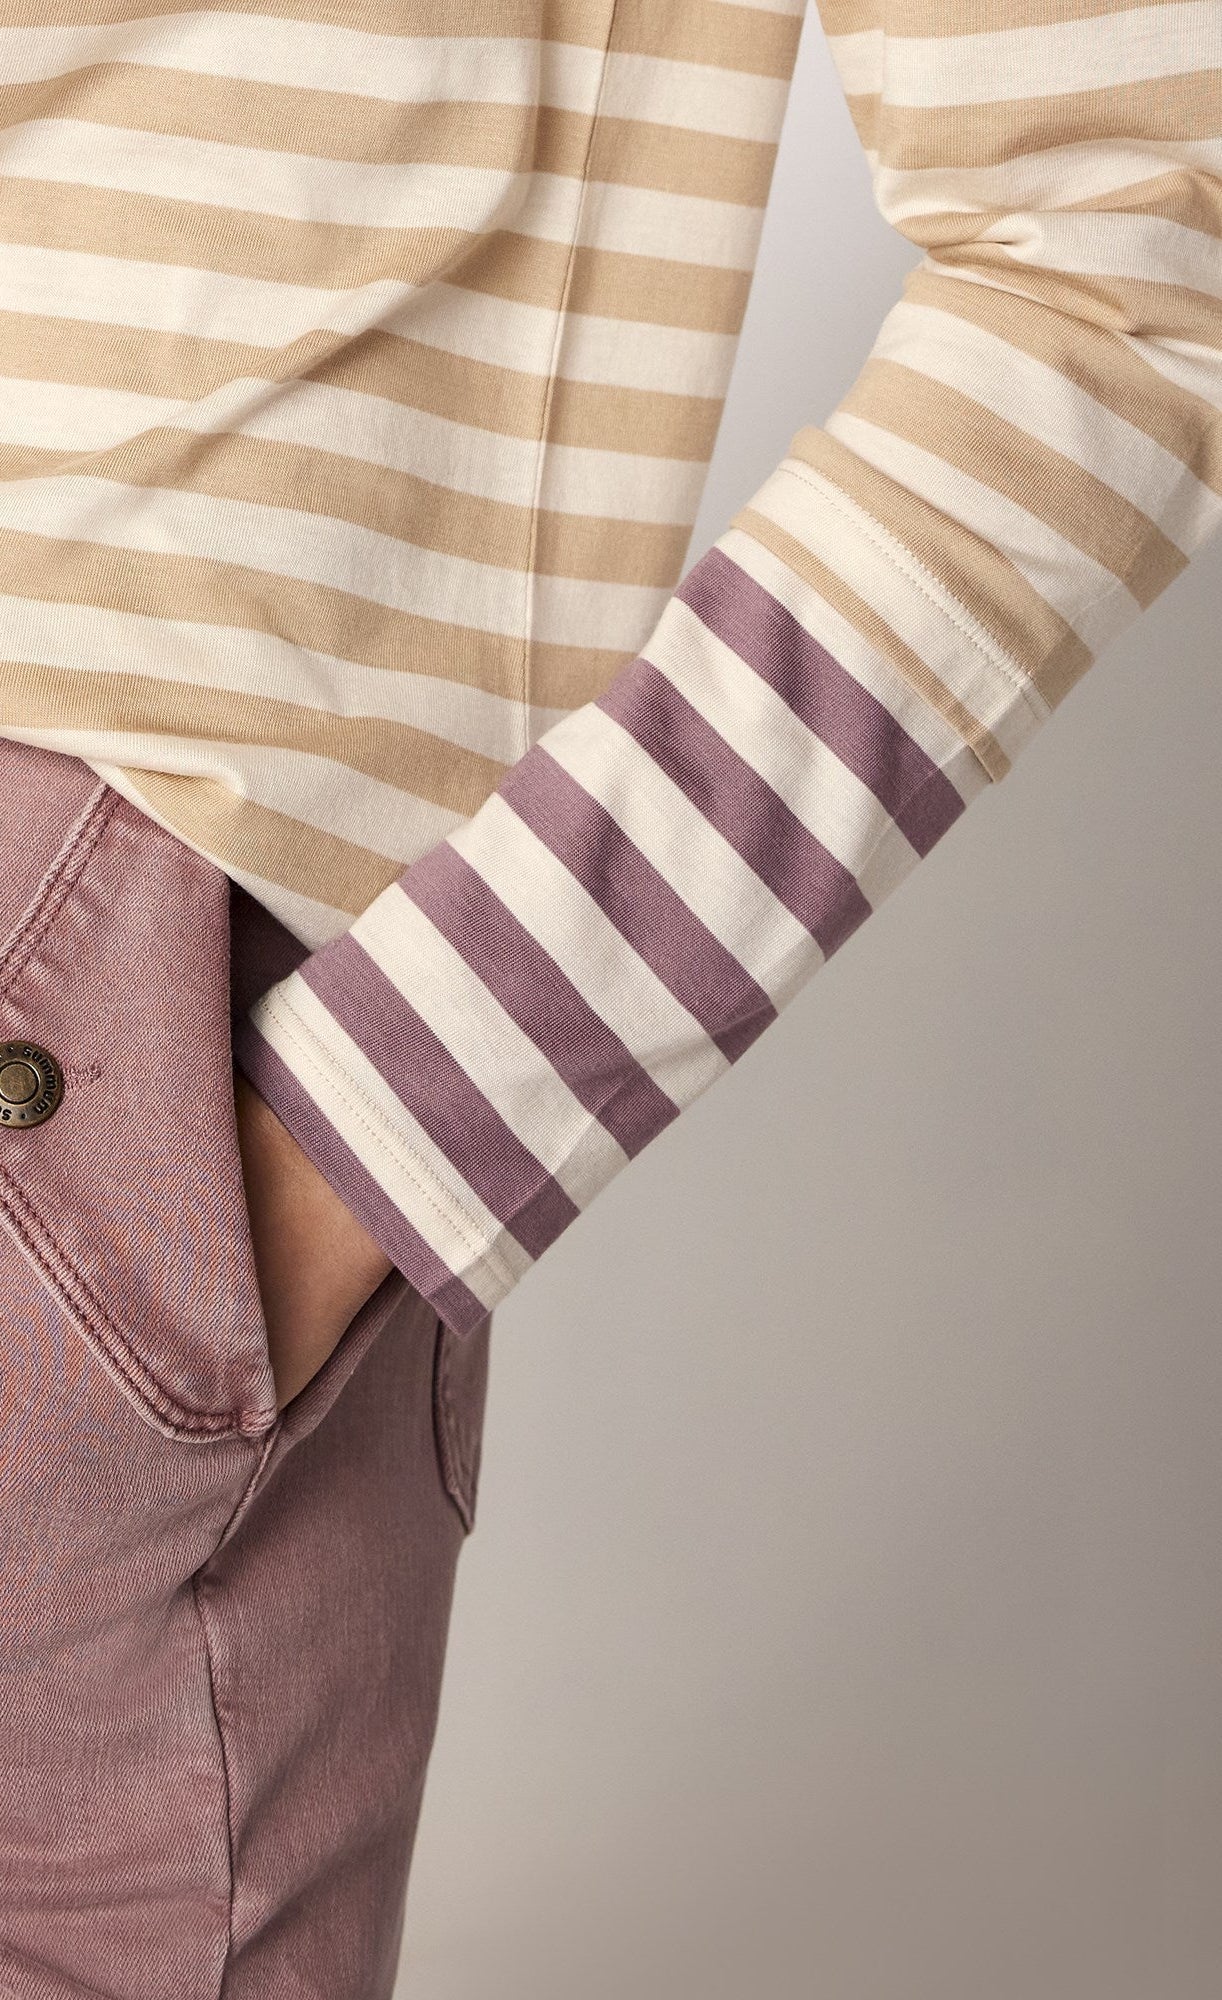 front close up view of the summum striped tone-on-tone shirt. This top has neutral brown stripes with contrasting purple stripes on the end of the long sleeves. The top also has a slight funnel neck.